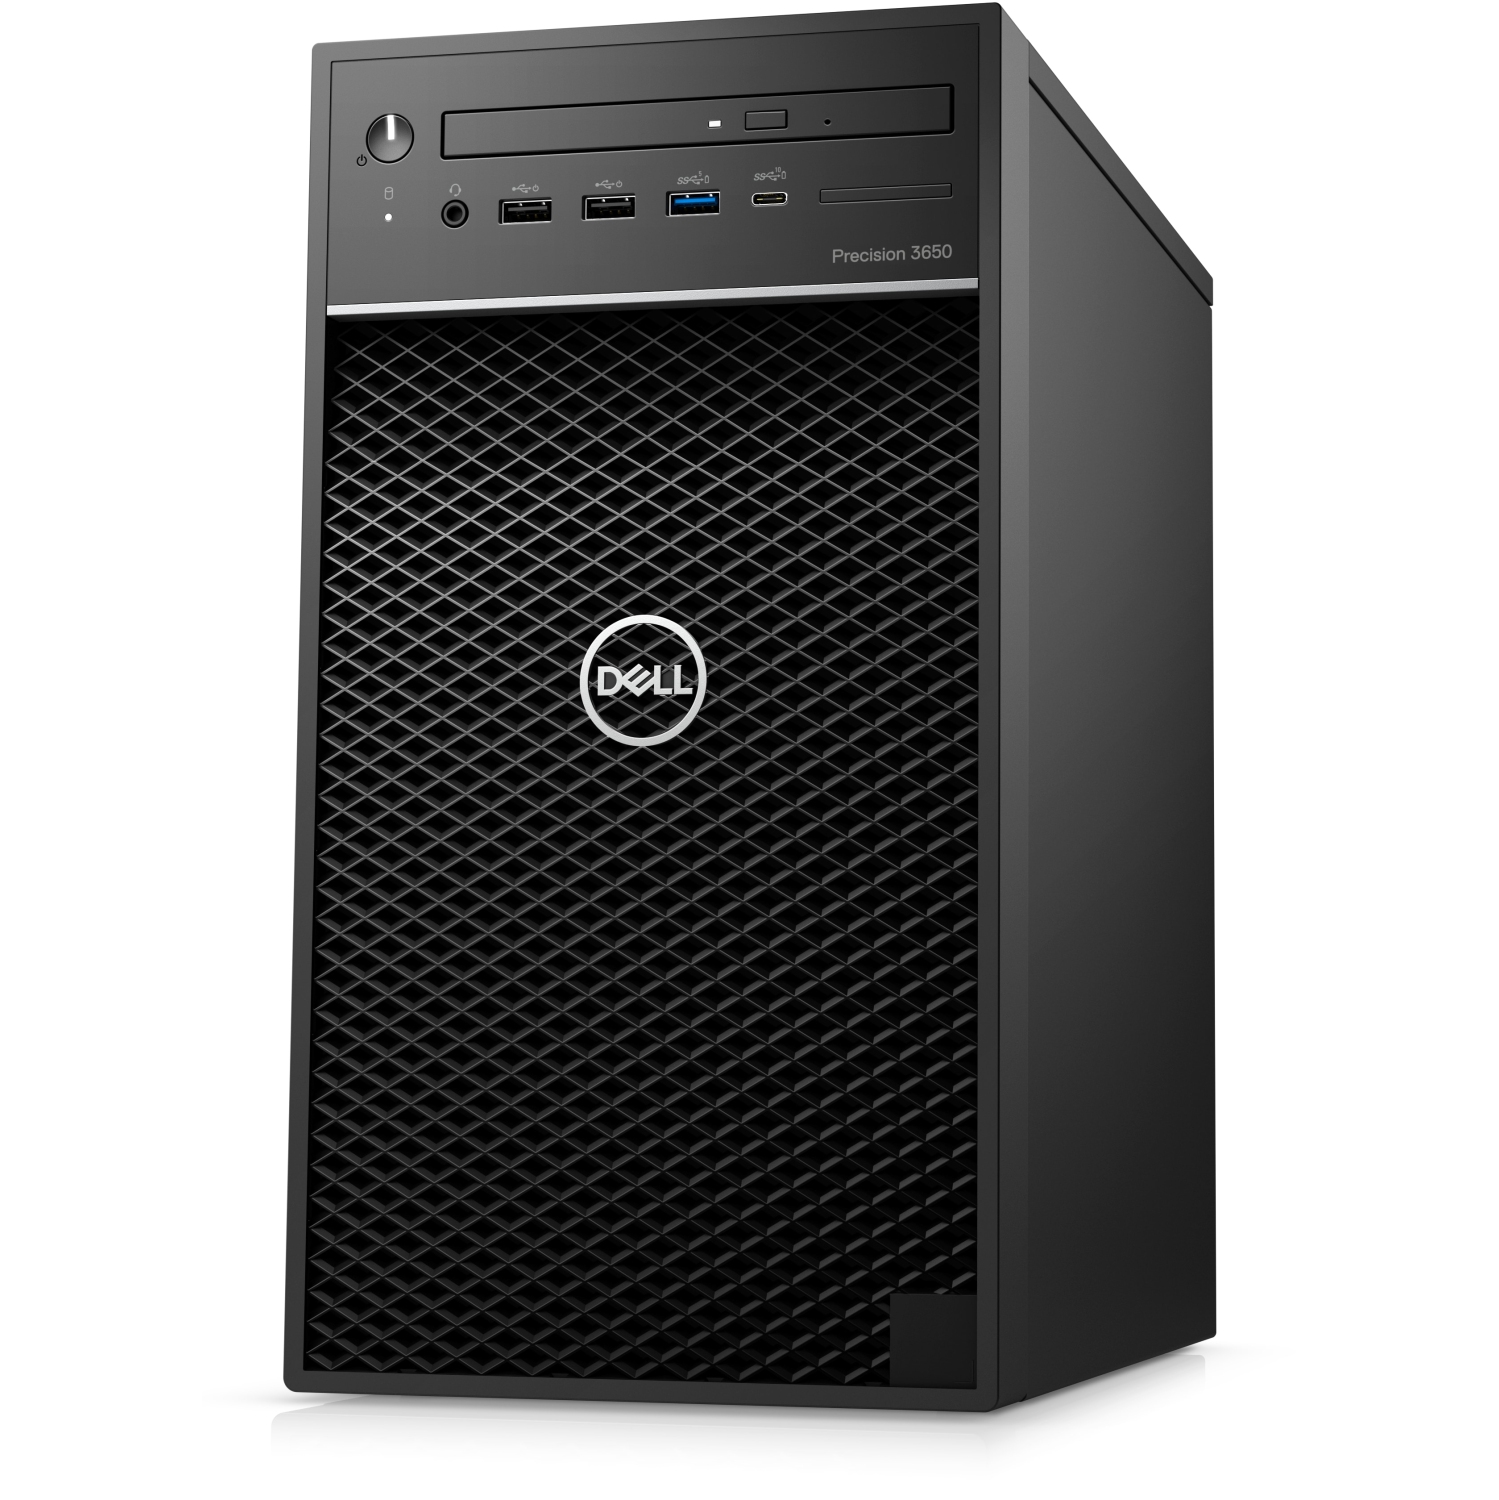 Refurbished (Excellent) - Dell Precision T3650 Workstation Desktop (2021), Core i9, 4TB HDD + 2TB SSD NVM, 128GB RAM, RTX 3090, 5.3 GHz, 11th Gen CPU Certified